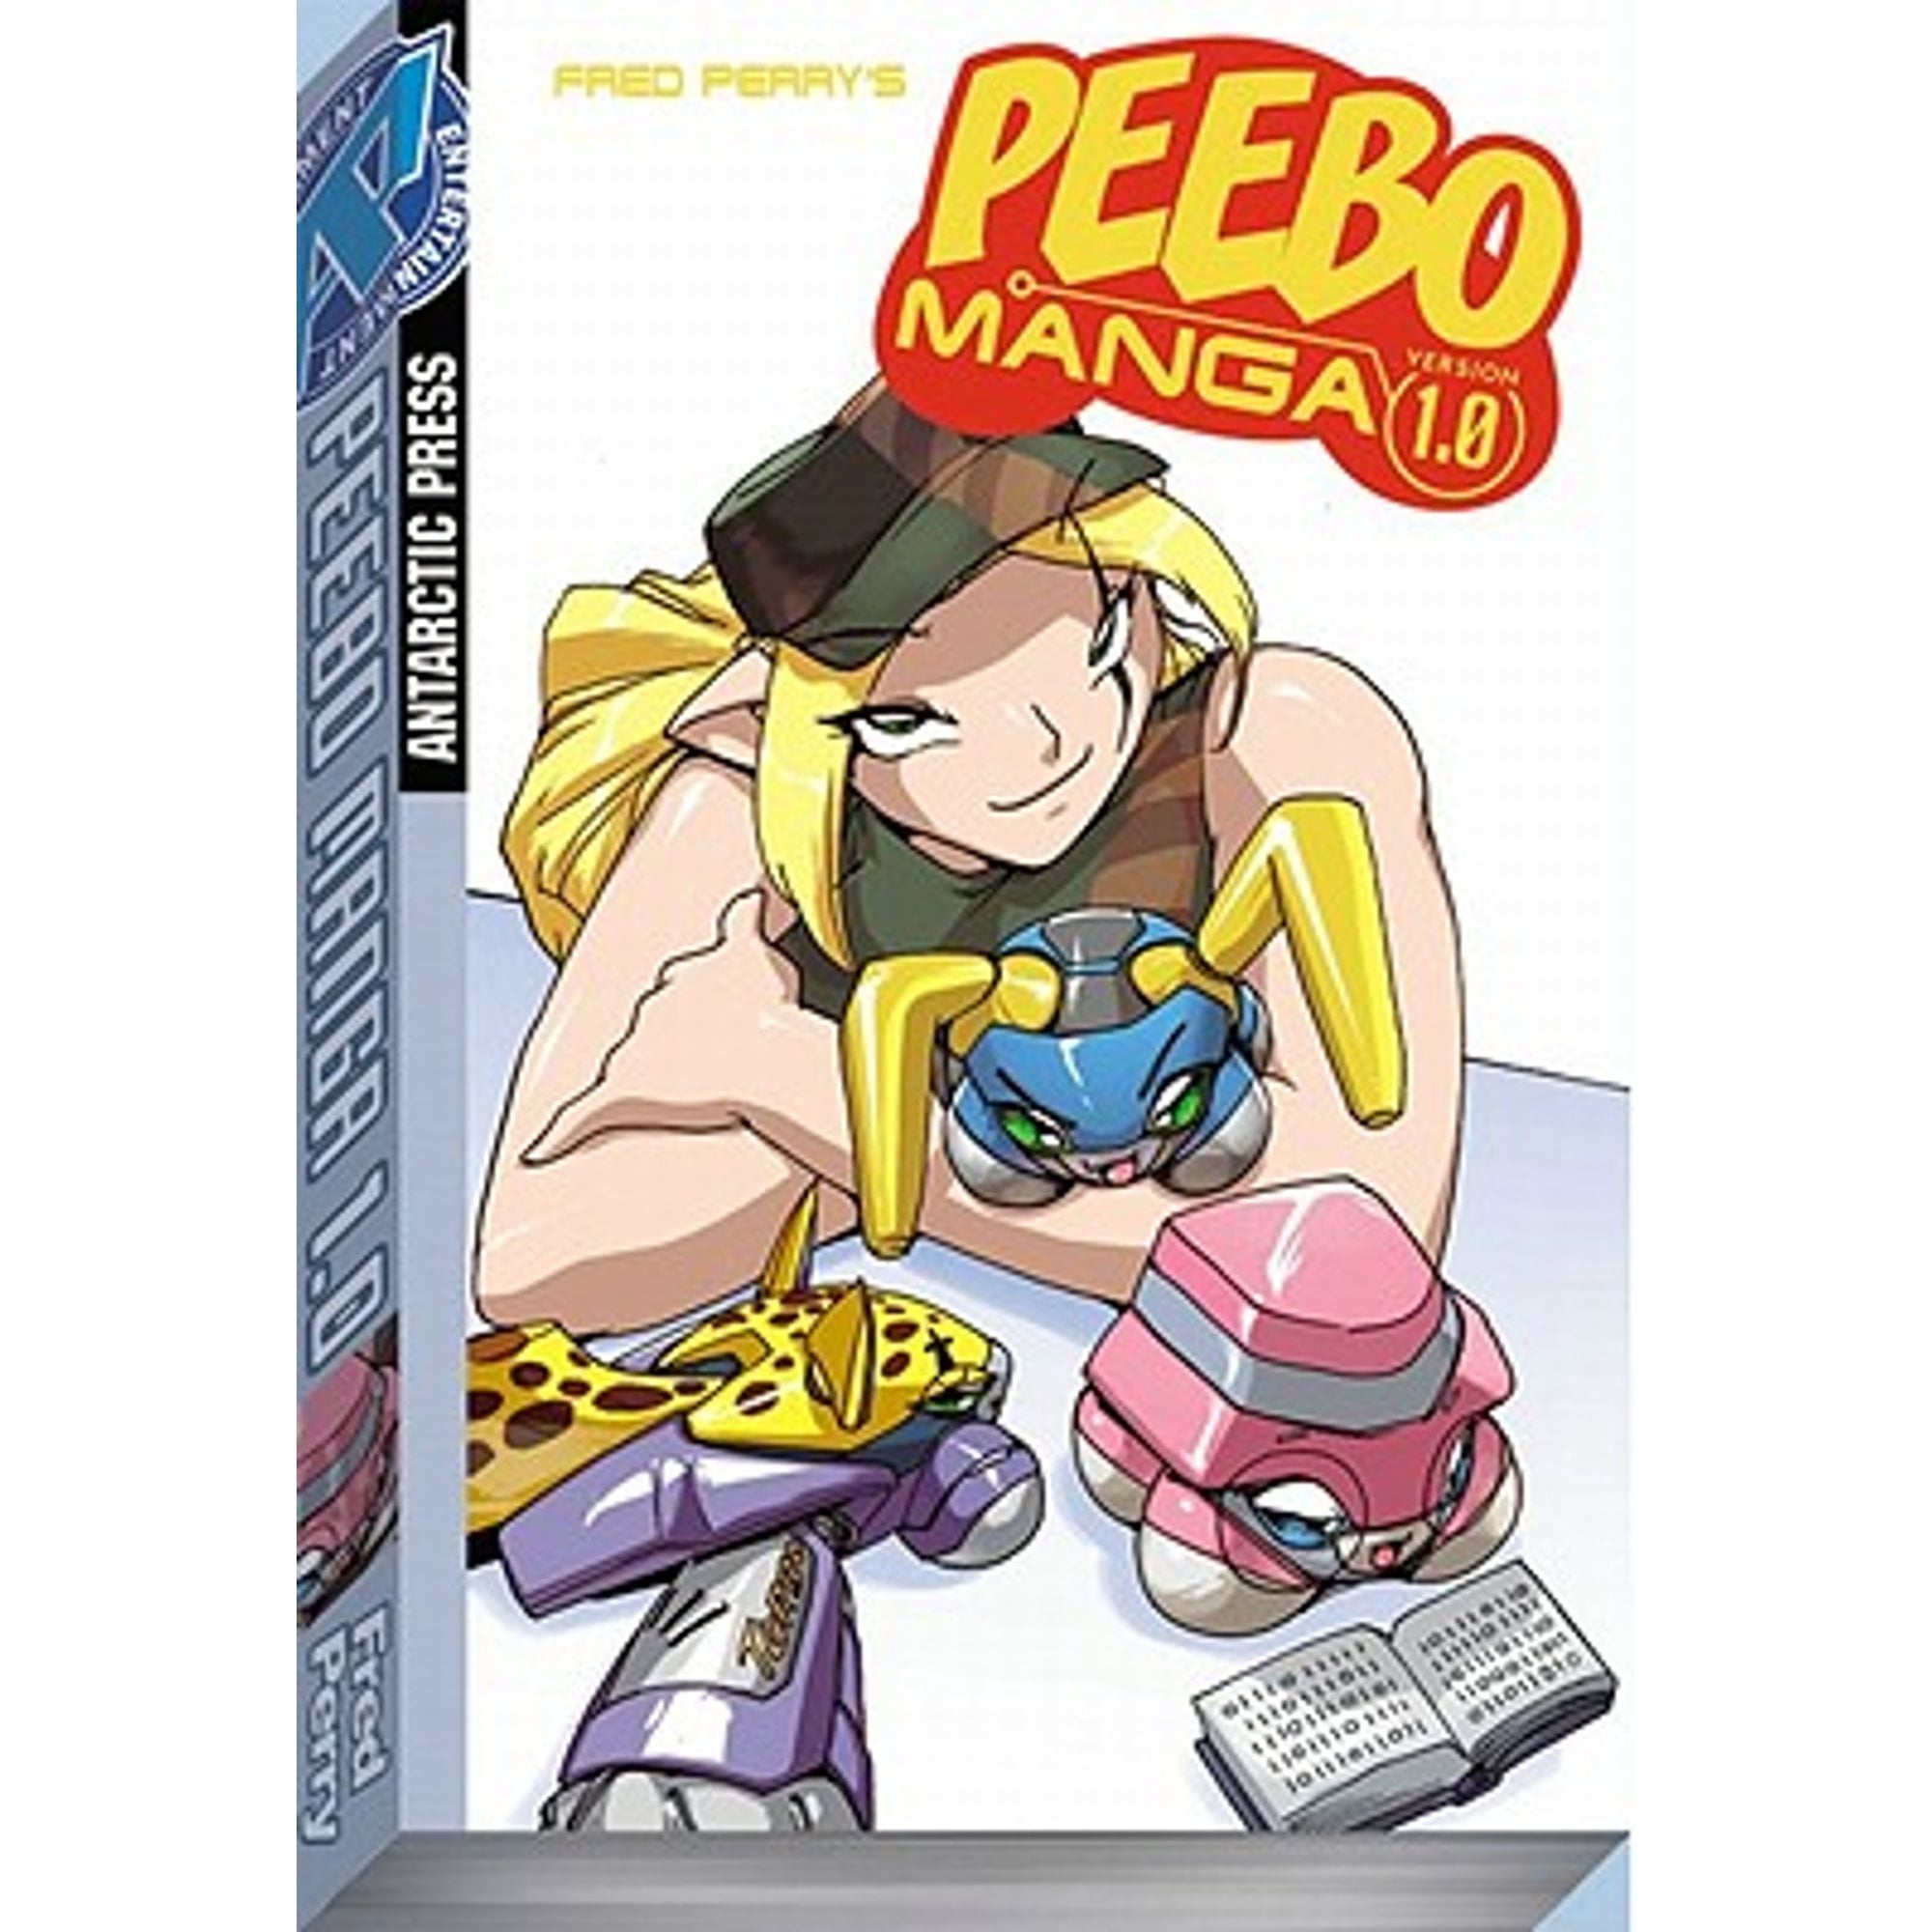 Pre-Owned Peebomanga 1.0 Pocket Manga Volume 1 (Paperback) by Fred Perry, Fred Perry